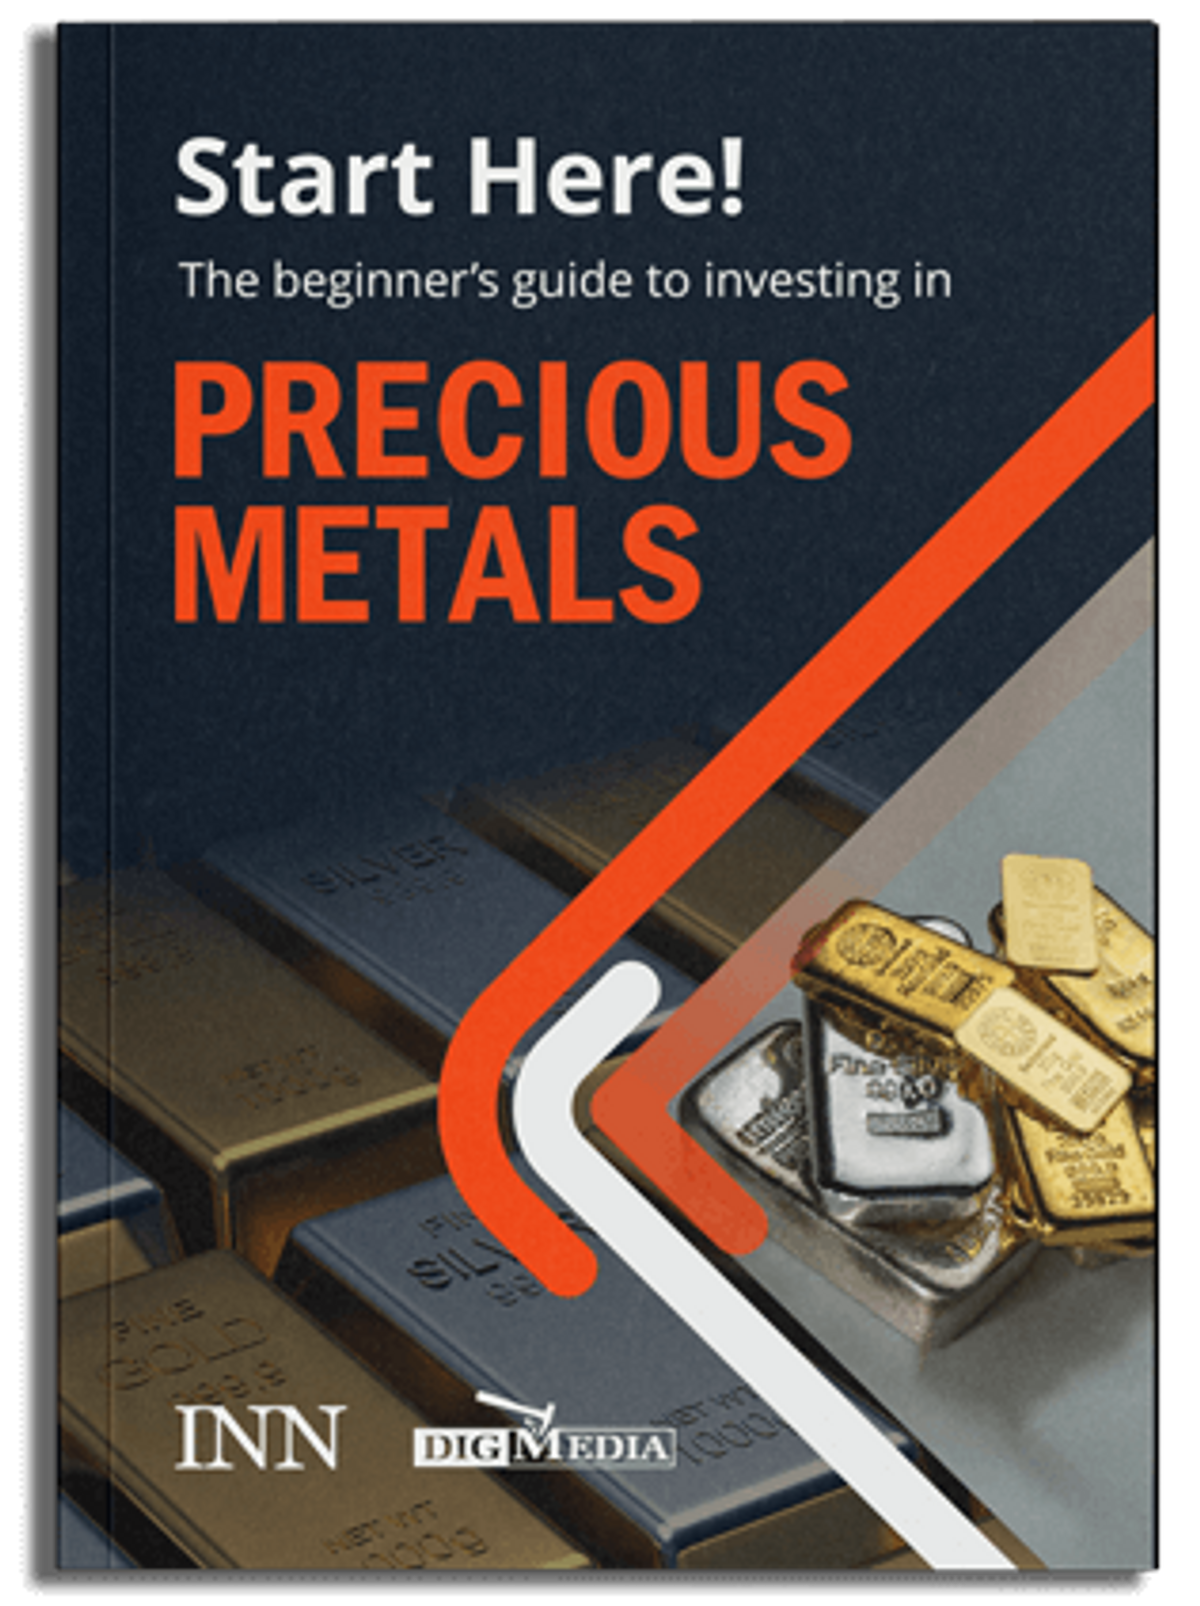 The Beginner's Guide to Investing in Precious Metals